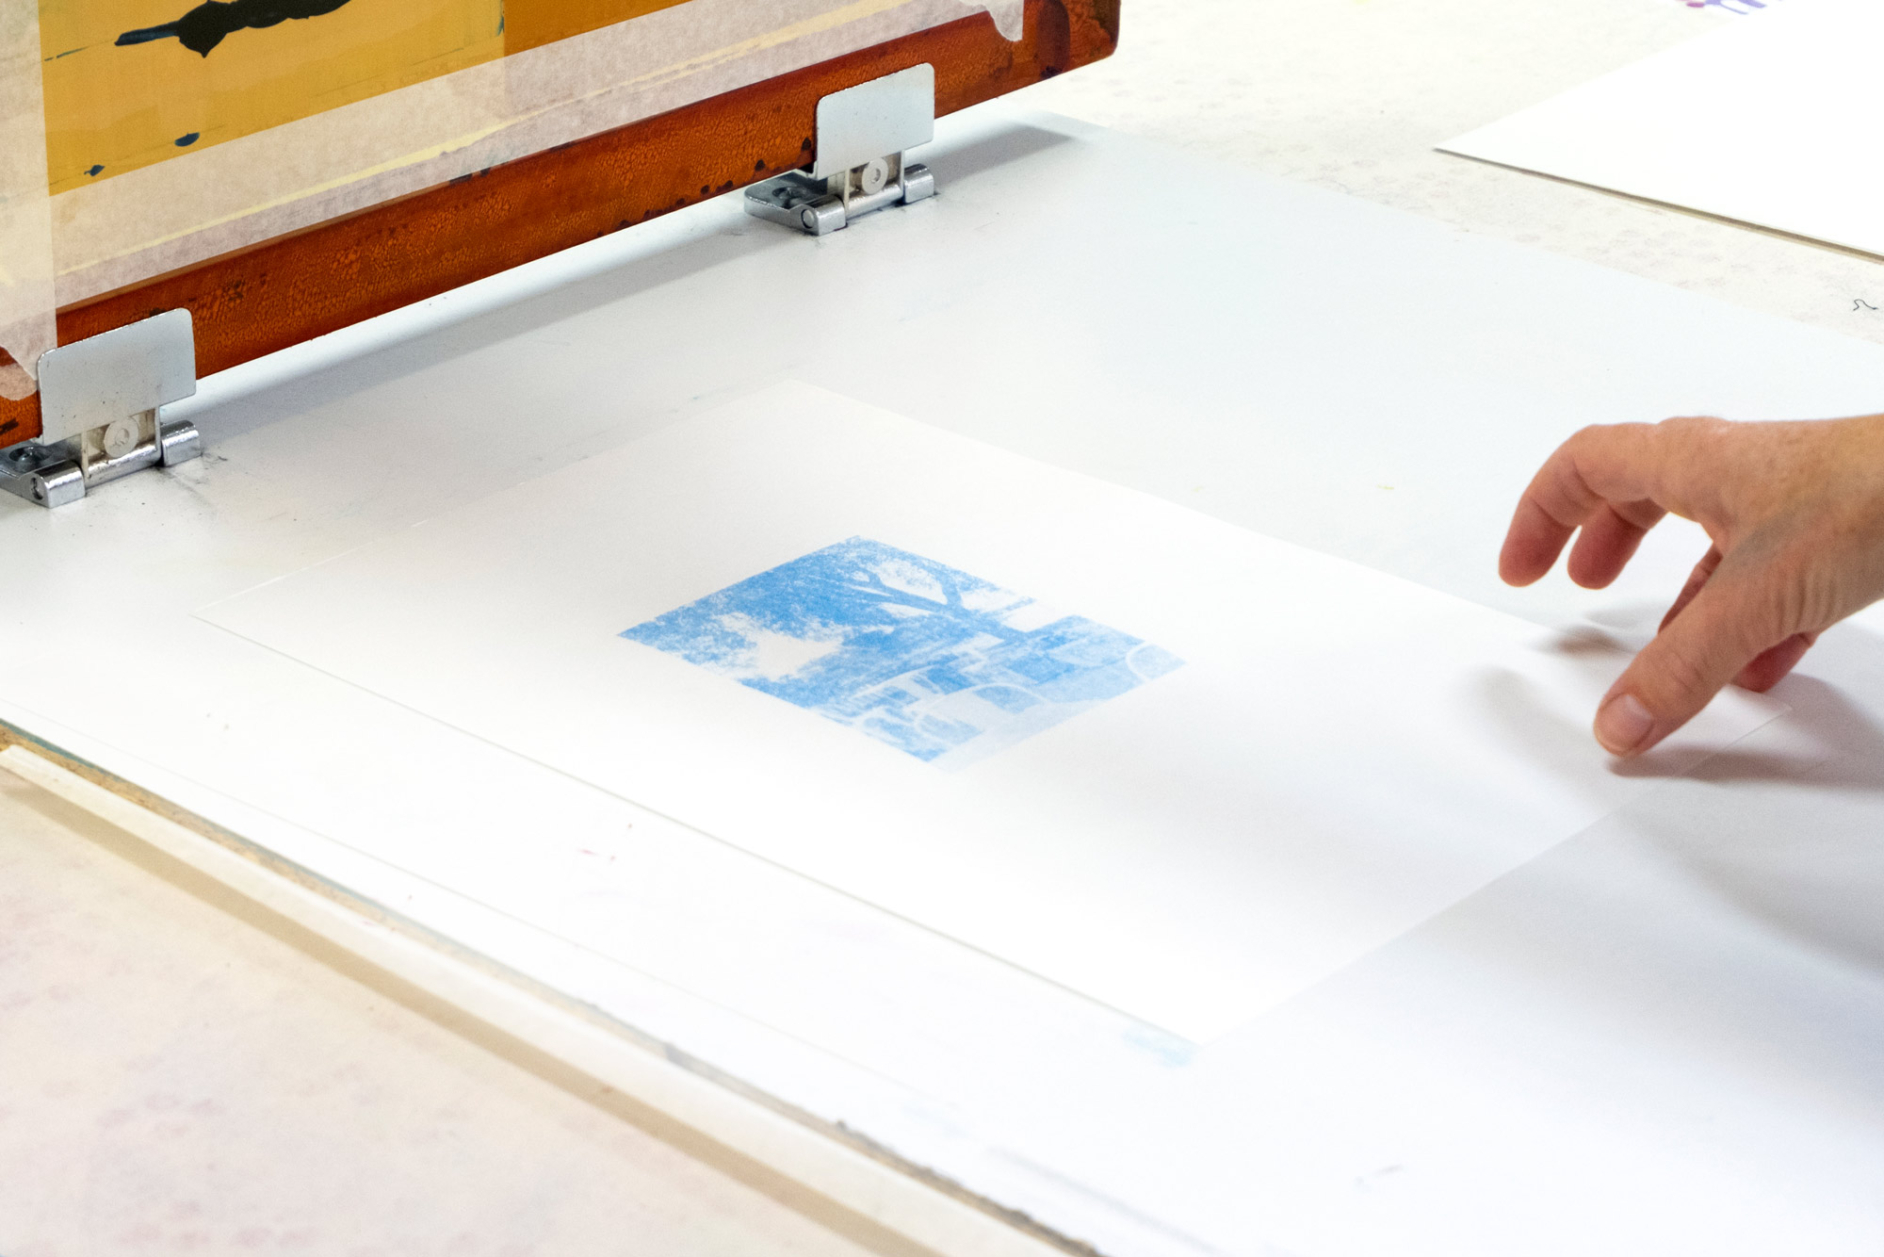 A blue image printed on a white sheet of paper, hand to the right side of the frame